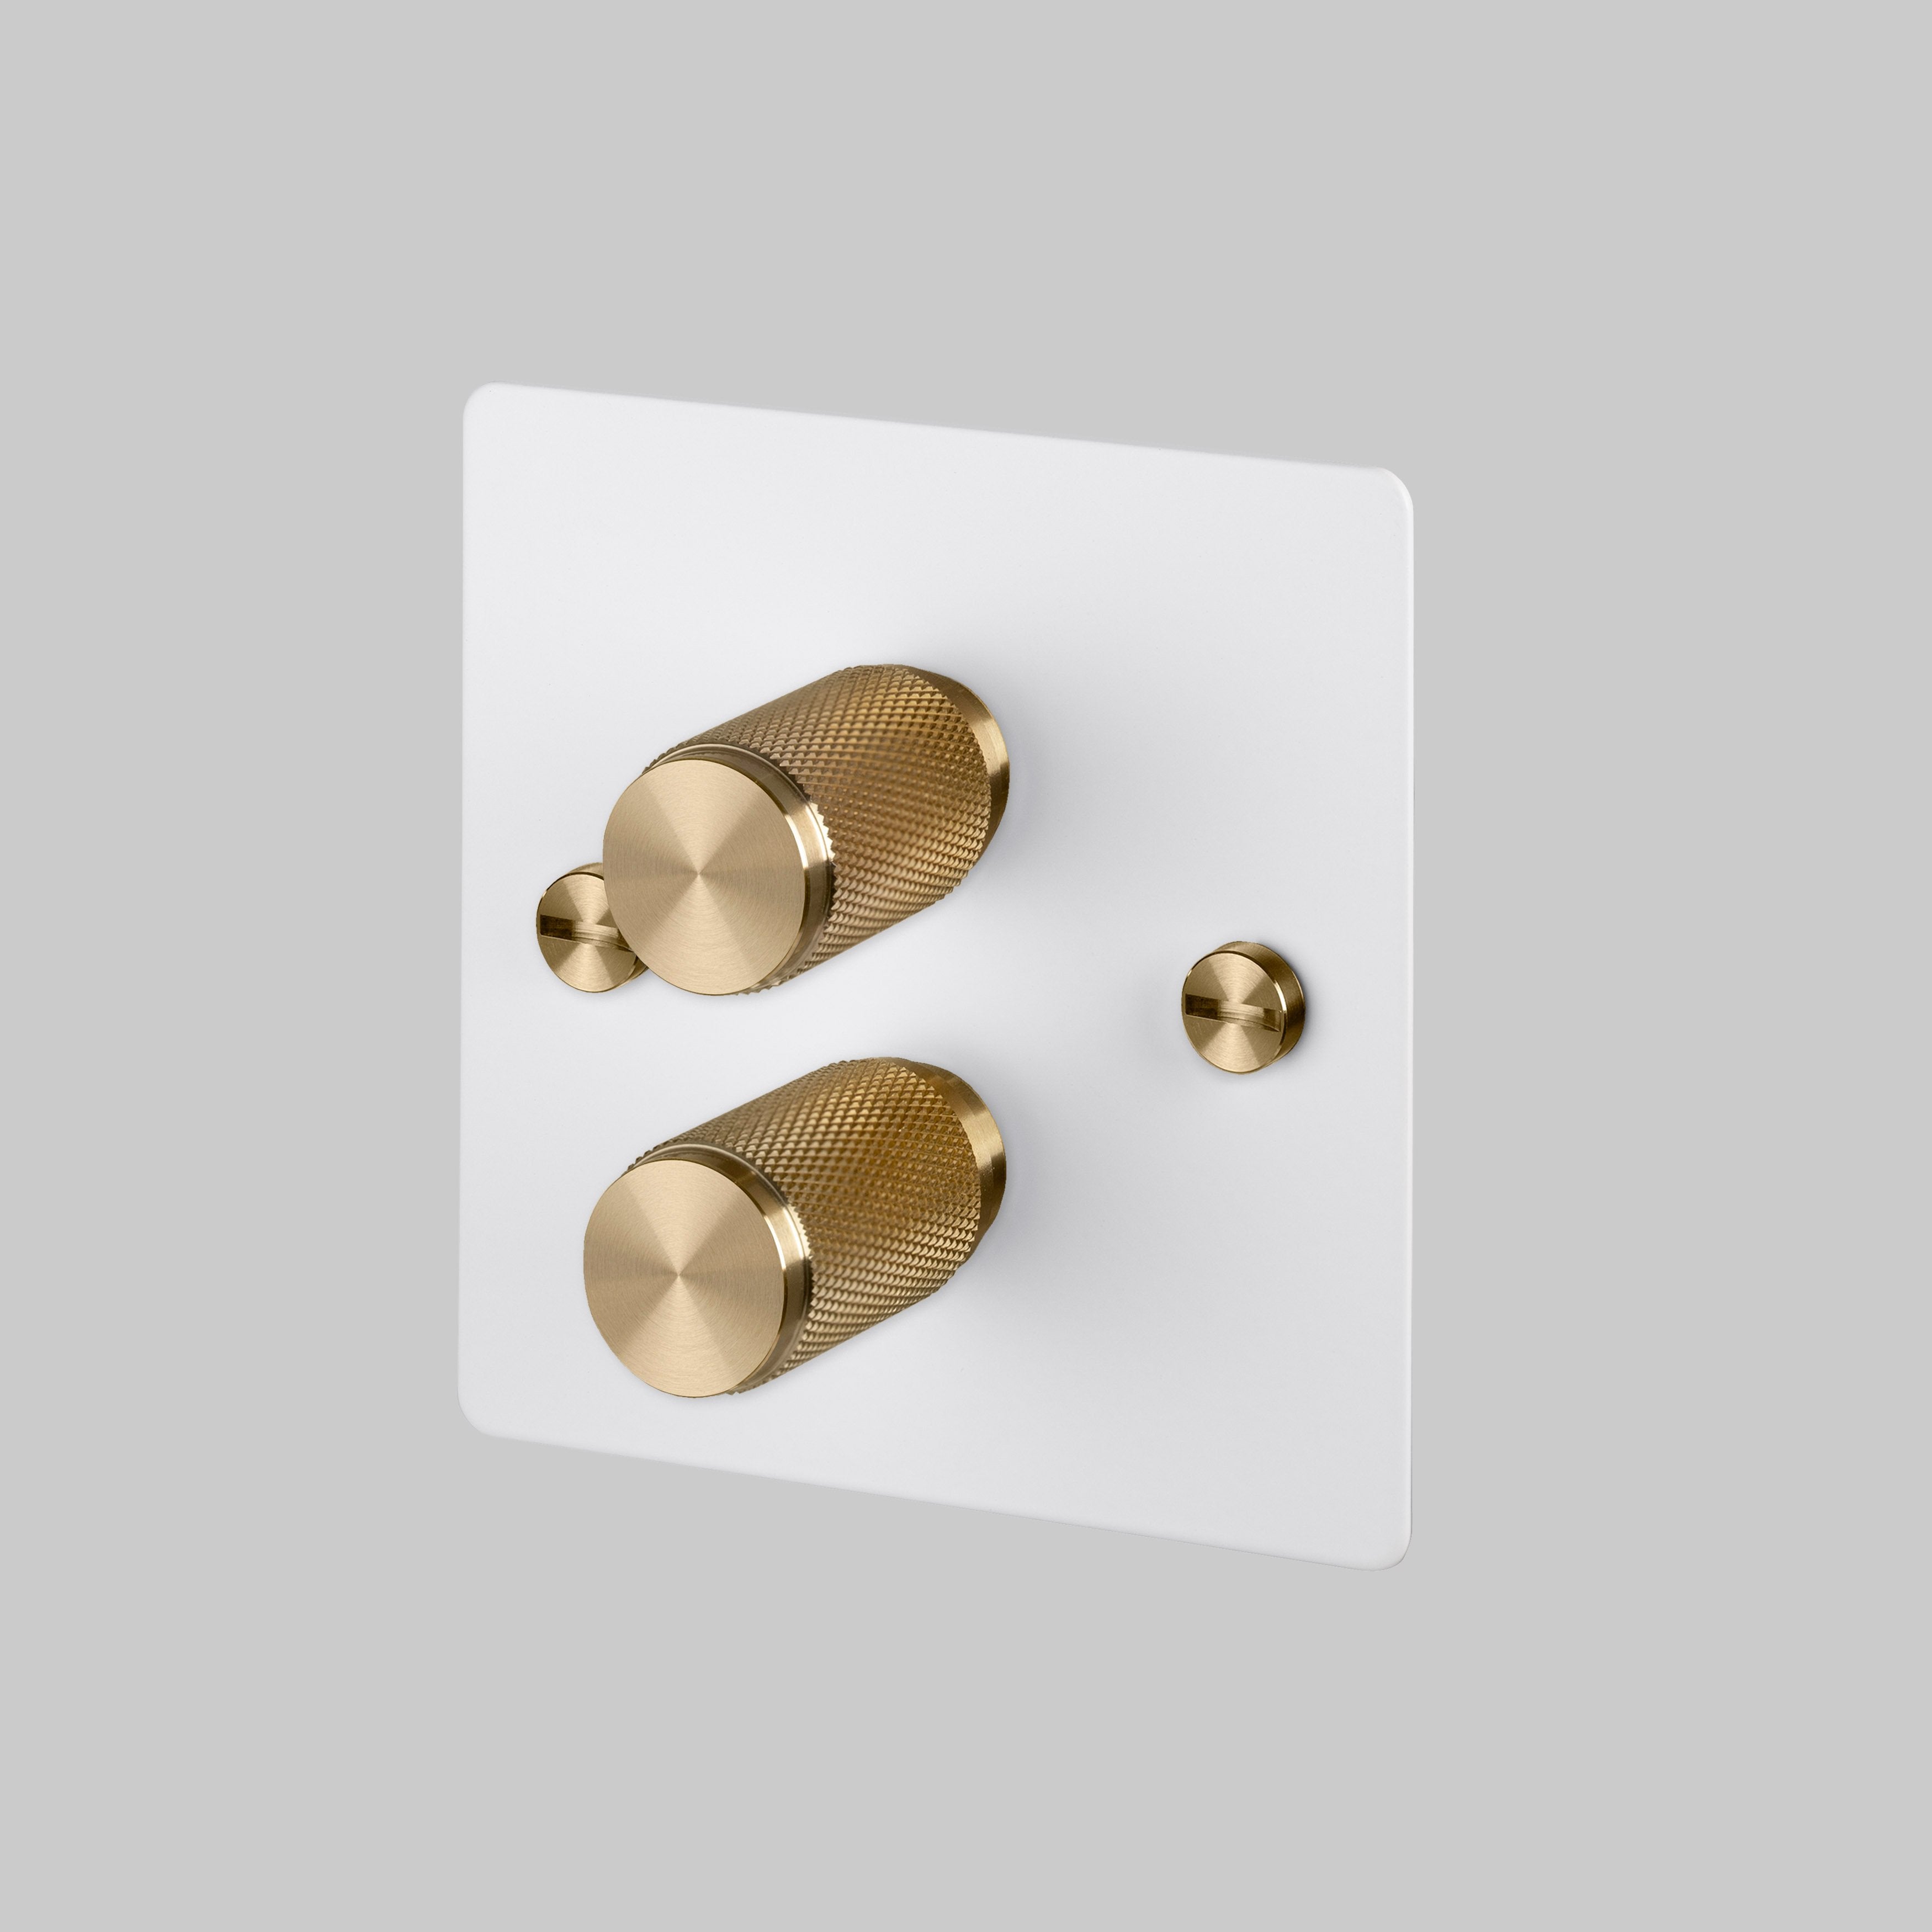 Buster and Punch 2G DIMMER / WHITE / BRASS